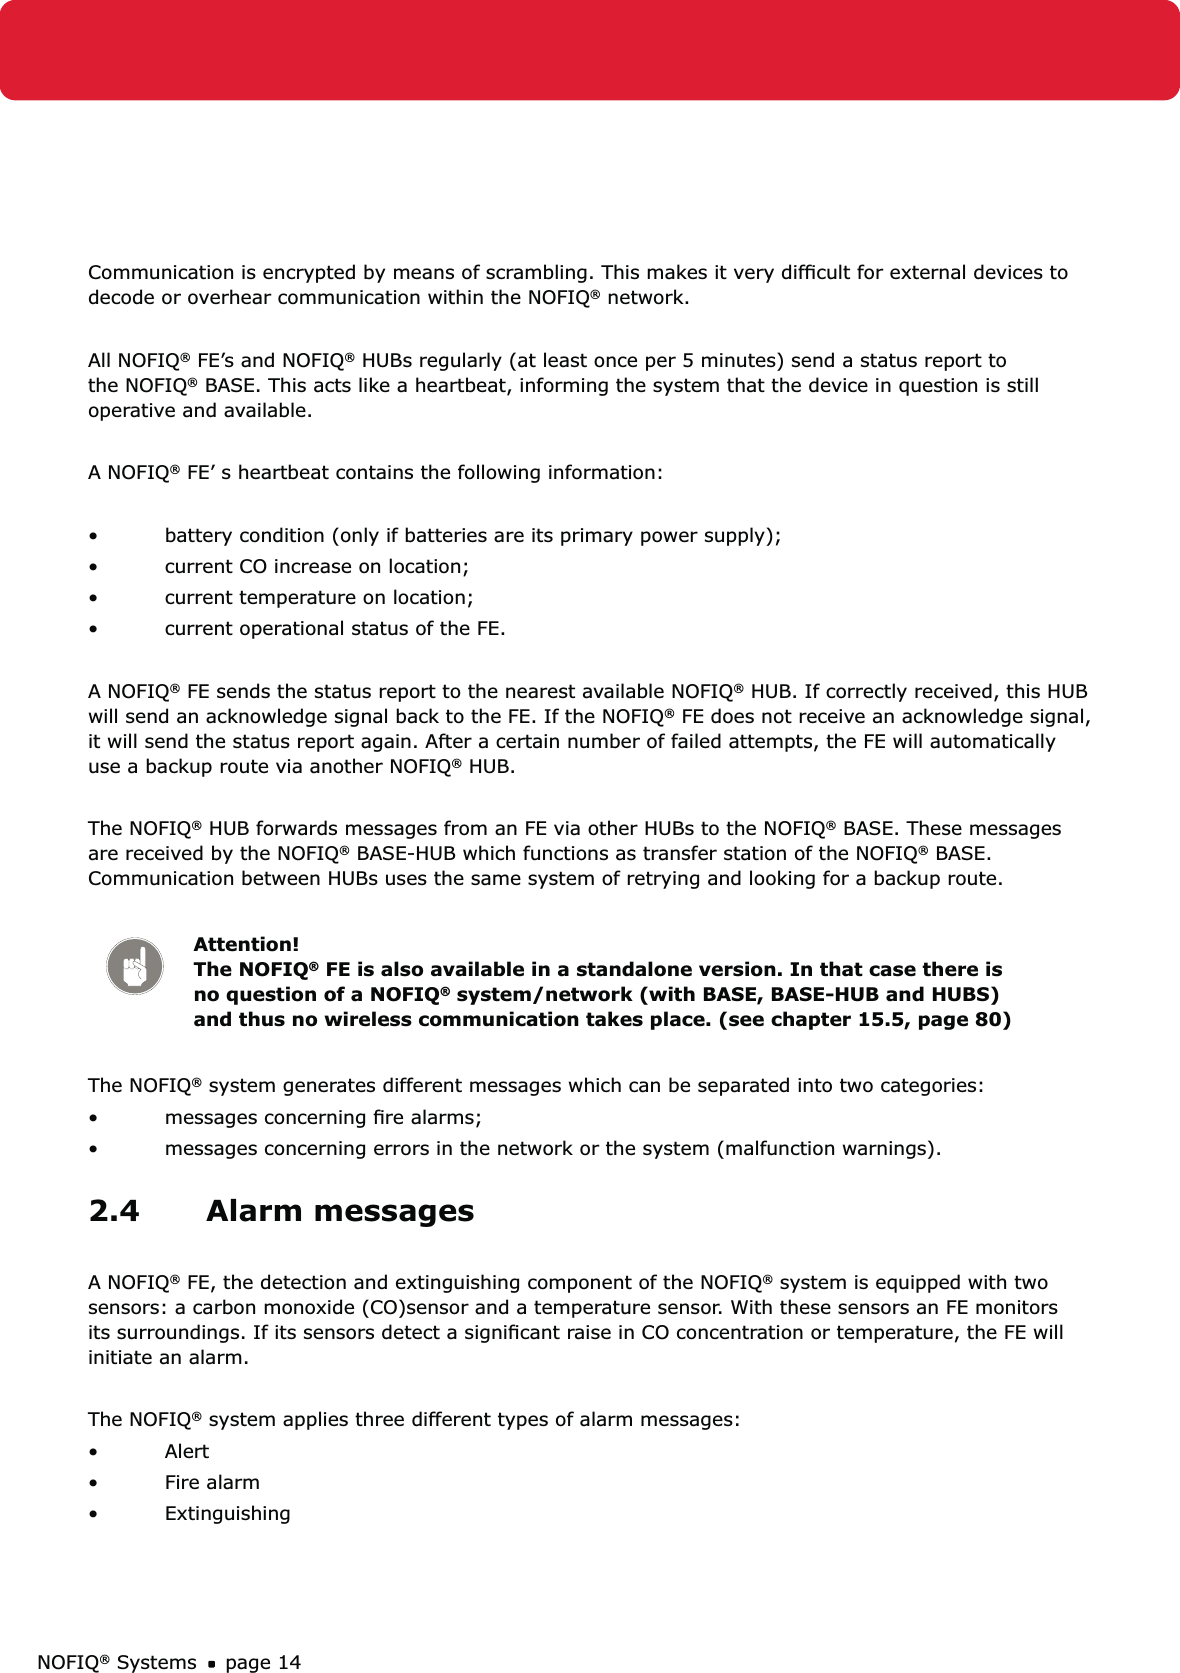 NOFIQ® Systems page 14Communication is encrypted by means of scrambling. This makes it very difﬁcult for external devices to decode or overhear communication within the NOFIQ® network.All NOFIQ® FE’s and NOFIQ® HUBs regularly (at least once per 5 minutes) send a status report to the NOFIQ® BASE. This acts like a heartbeat, informing the system that the device in question is still operative and available.A NOFIQ® FE’ s heartbeat contains the following information:battery condition (only if batteries are its primary power supply);• current CO increase on location;• current temperature on location;• current operational status of the FE.• A NOFIQ® FE sends the status report to the nearest available NOFIQ® HUB. If correctly received, this HUB will send an acknowledge signal back to the FE. If the NOFIQ® FE does not receive an acknowledge signal, it will send the status report again. After a certain number of failed attempts, the FE will automatically use a backup route via another NOFIQ® HUB.The NOFIQ® HUB forwards messages from an FE via other HUBs to the NOFIQ® BASE. These messages are received by the NOFIQ® BASE-HUB which functions as transfer station of the NOFIQ® BASE. Communication between HUBs uses the same system of retrying and looking for a backup route.Attention! The NOFIQ® FE is also available in a standalone version. In that case there is no question of a NOFIQ® system/network (with BASE, BASE-HUB and HUBS) and thus no wireless communication takes place. (see chapter 15.5, page 80)The NOFIQ® system generates different messages which can be separated into two categories: messages concerning ﬁre alarms;• messages concerning errors in the network or the system (malfunction warnings).• 2.4 Alarm messagesA NOFIQ® FE, the detection and extinguishing component of the NOFIQ® system is equipped with two sensors: a carbon monoxide (CO)sensor and a temperature sensor. With these sensors an FE monitors its surroundings. If its sensors detect a signiﬁcant raise in CO concentration or temperature, the FE will initiate an alarm.The NOFIQ® system applies three different types of alarm messages:Alert• Fire alarm• Extinguishing• 